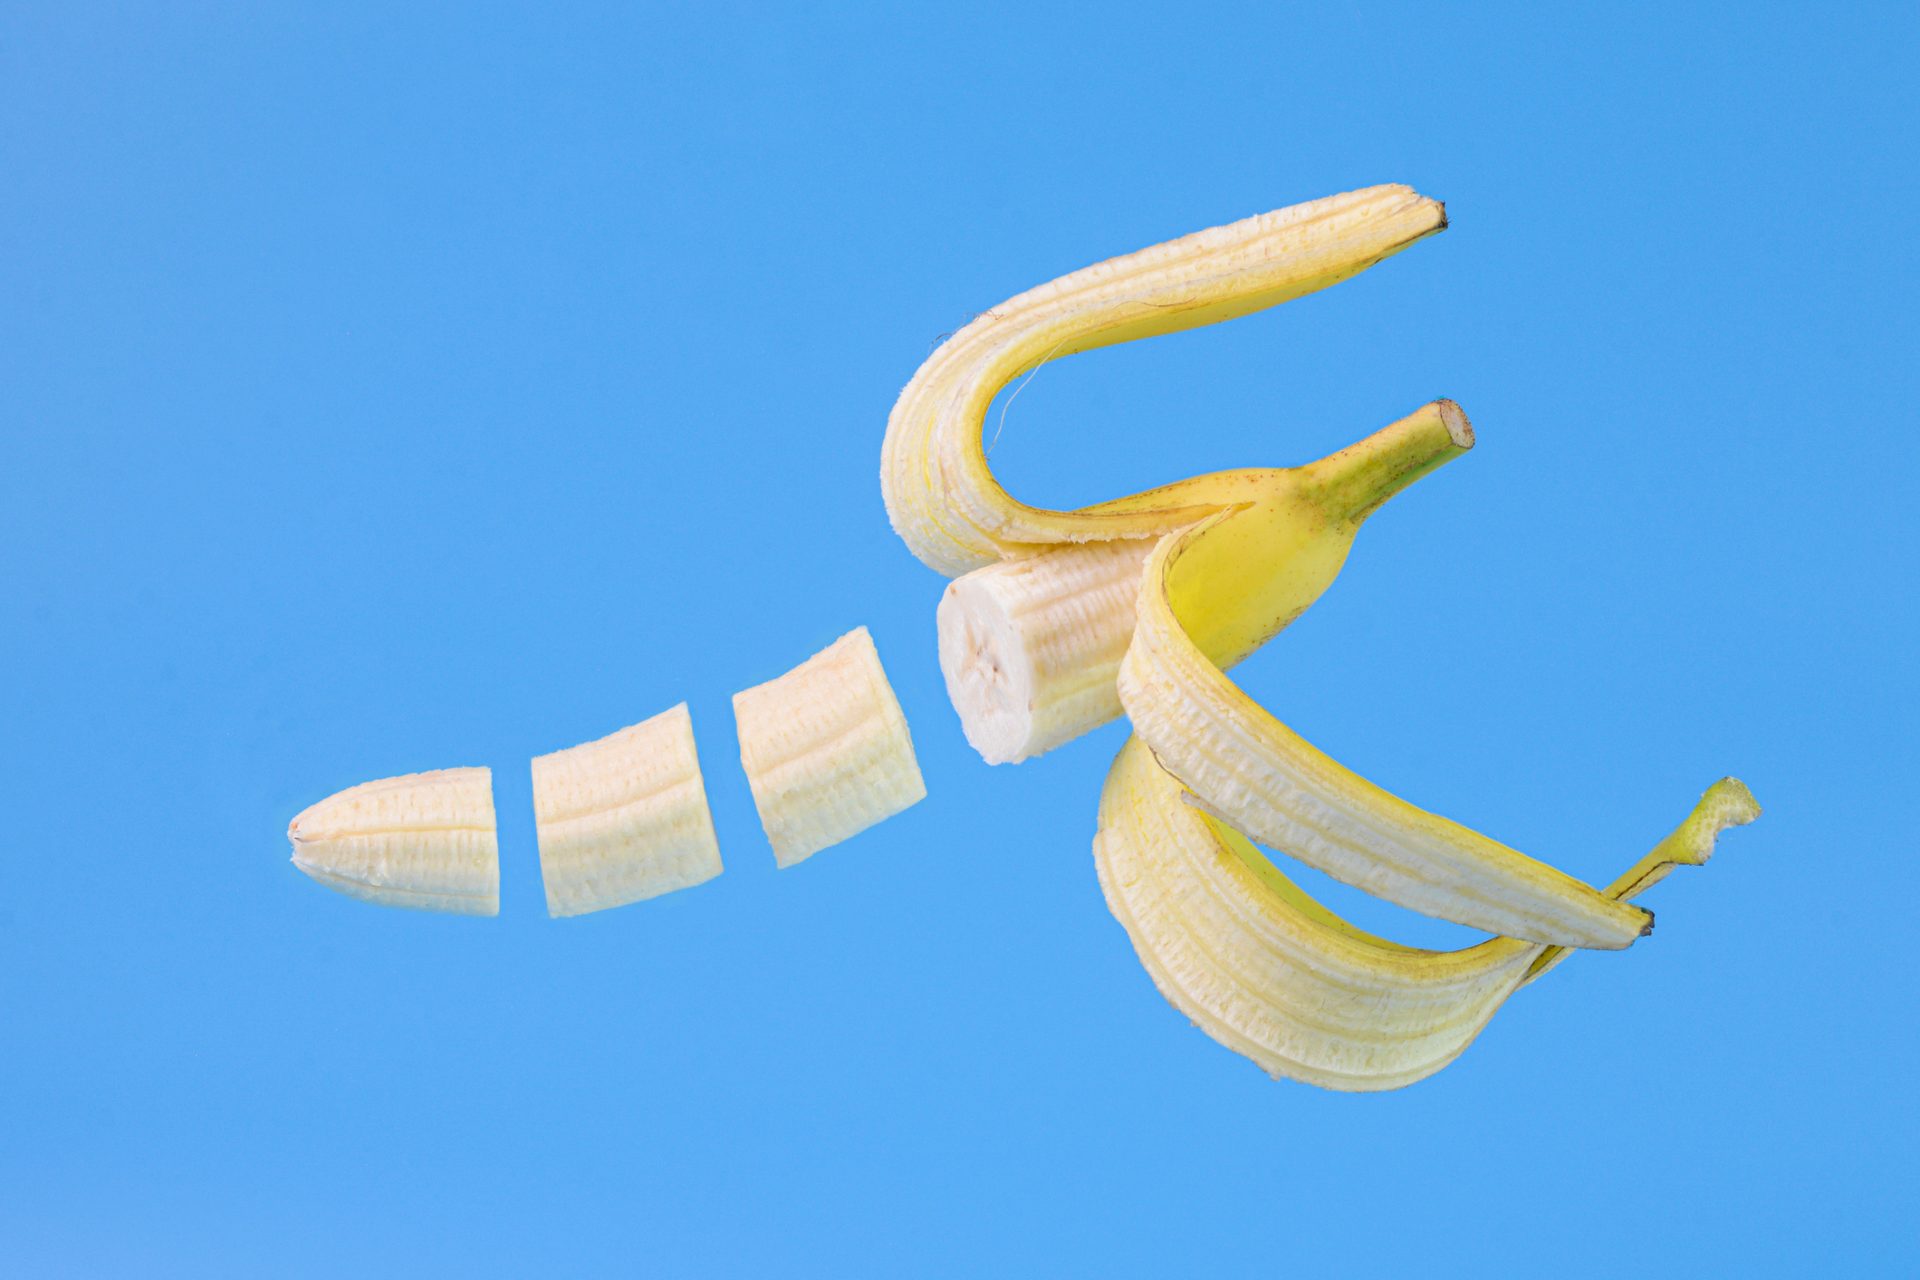 The Cavendish banana could be going extinct